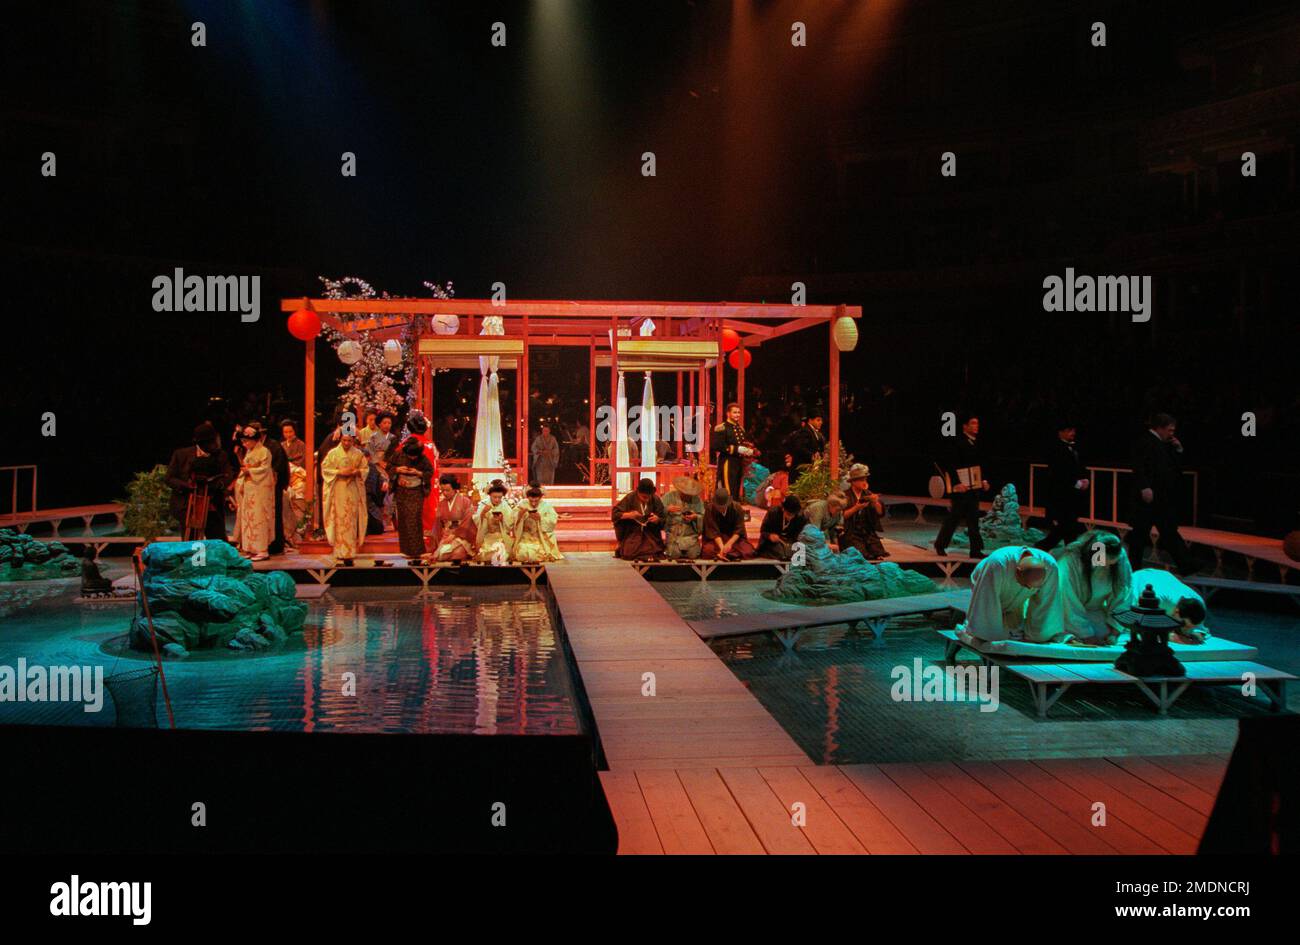 preparing for the wedding of Butterfly & Pinkerton in MADAM BUTTERFLY by Puccini at the Royal Albert Hall, London SW7  19/02/1998  a Raymond Gubbay production  conductor: Peter Robinson  design: David Roger  lighting: Andrew Bridge  director: David Freeman Stock Photo